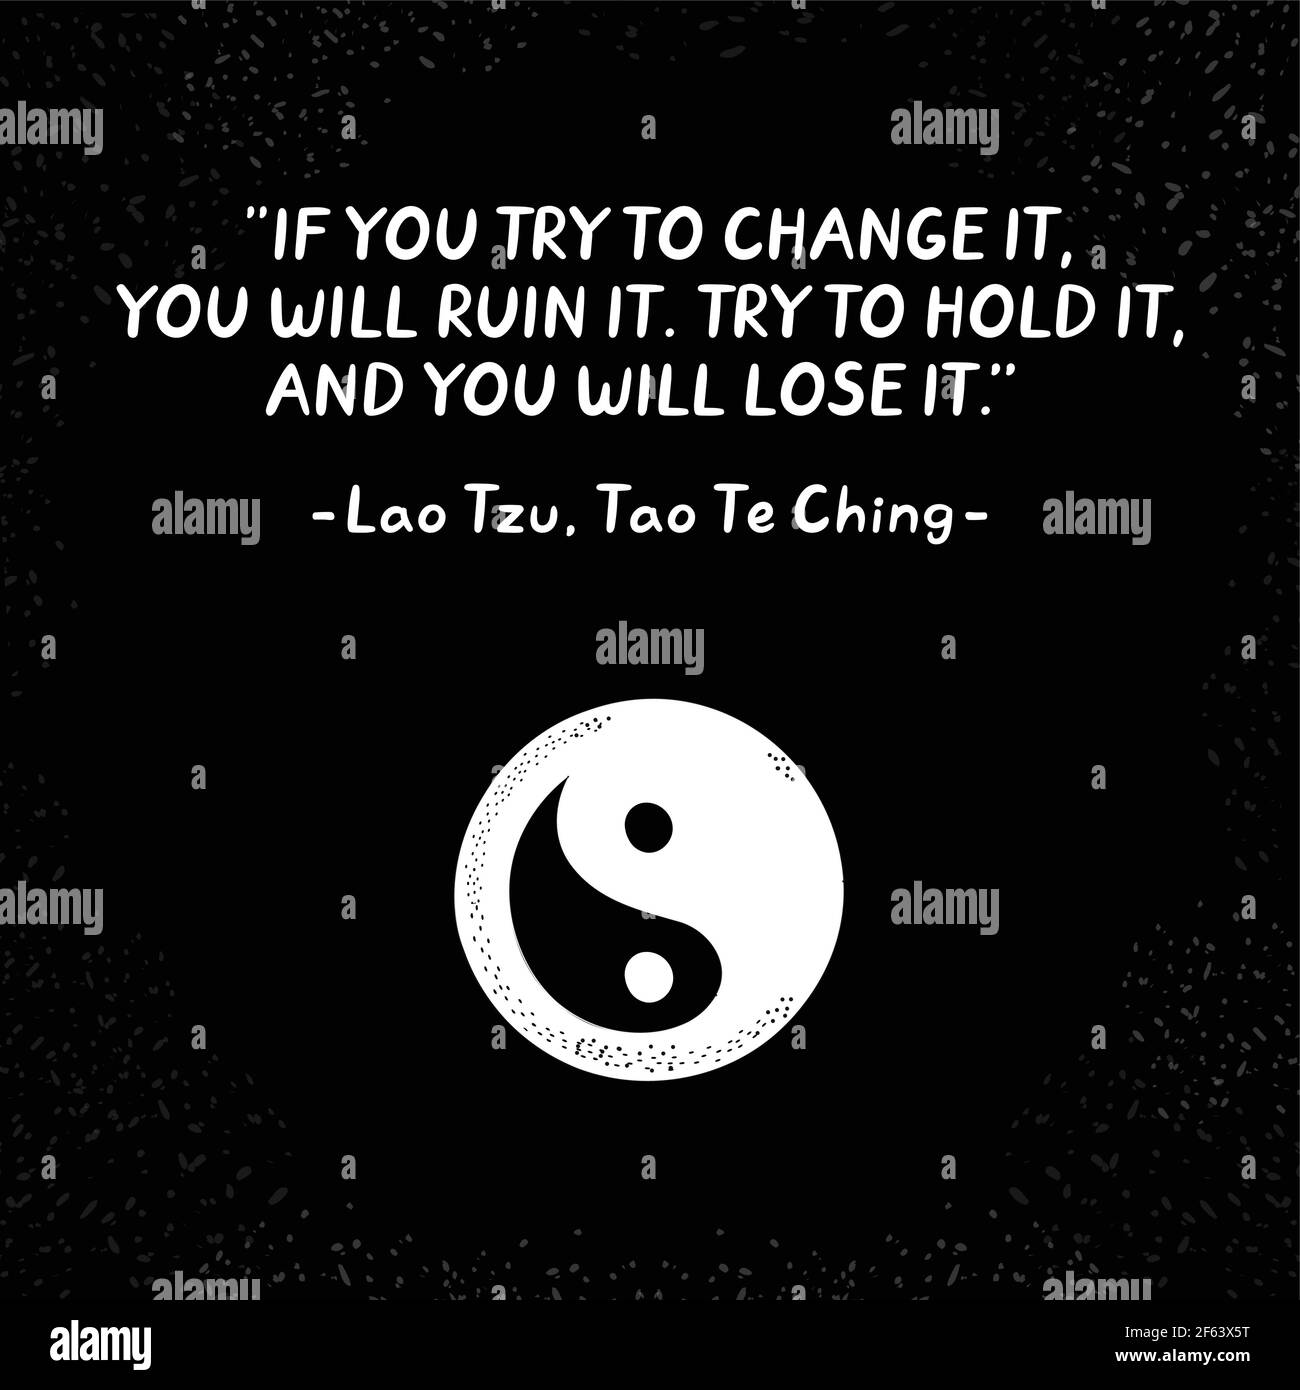 Lao Tzu quote and Yin Yang symbol. Vector hand drawn style illustration icon design Stock Vector